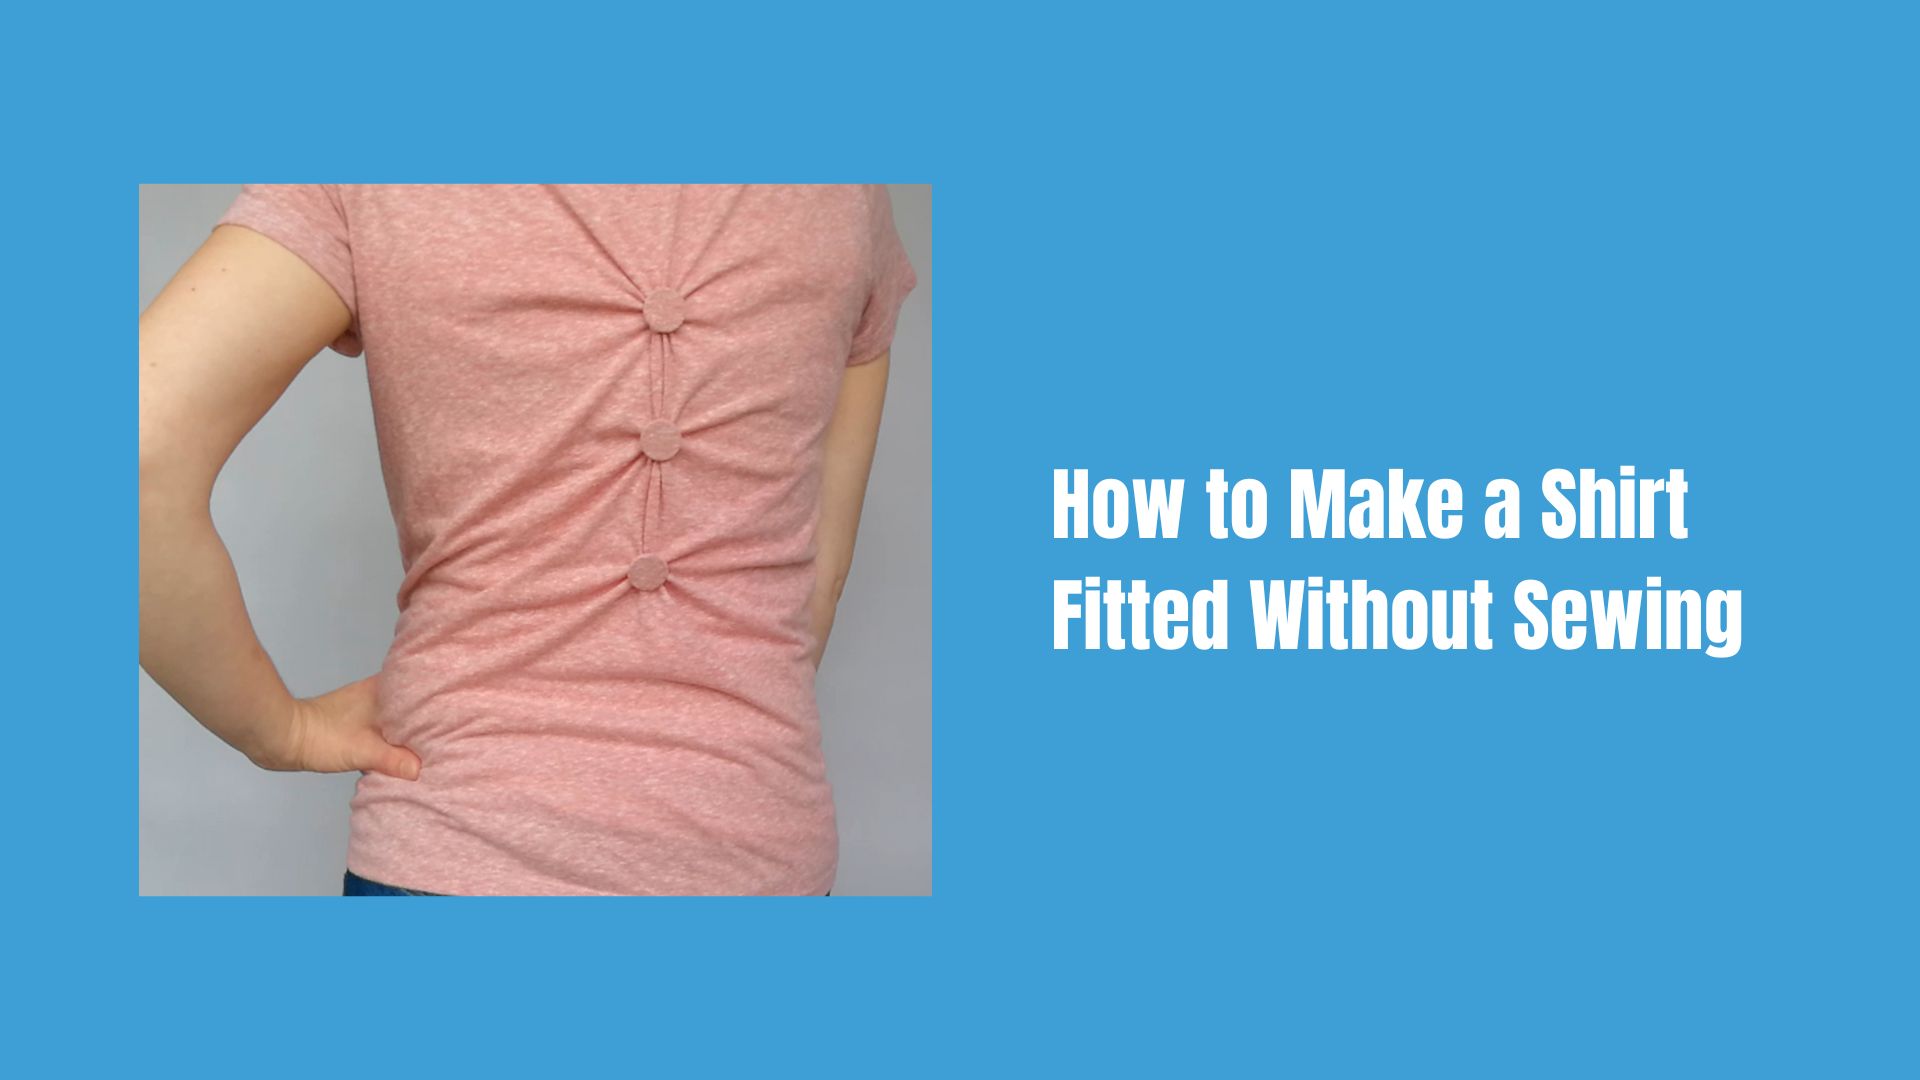 How to Make a Shirt Fitted Without Sewing